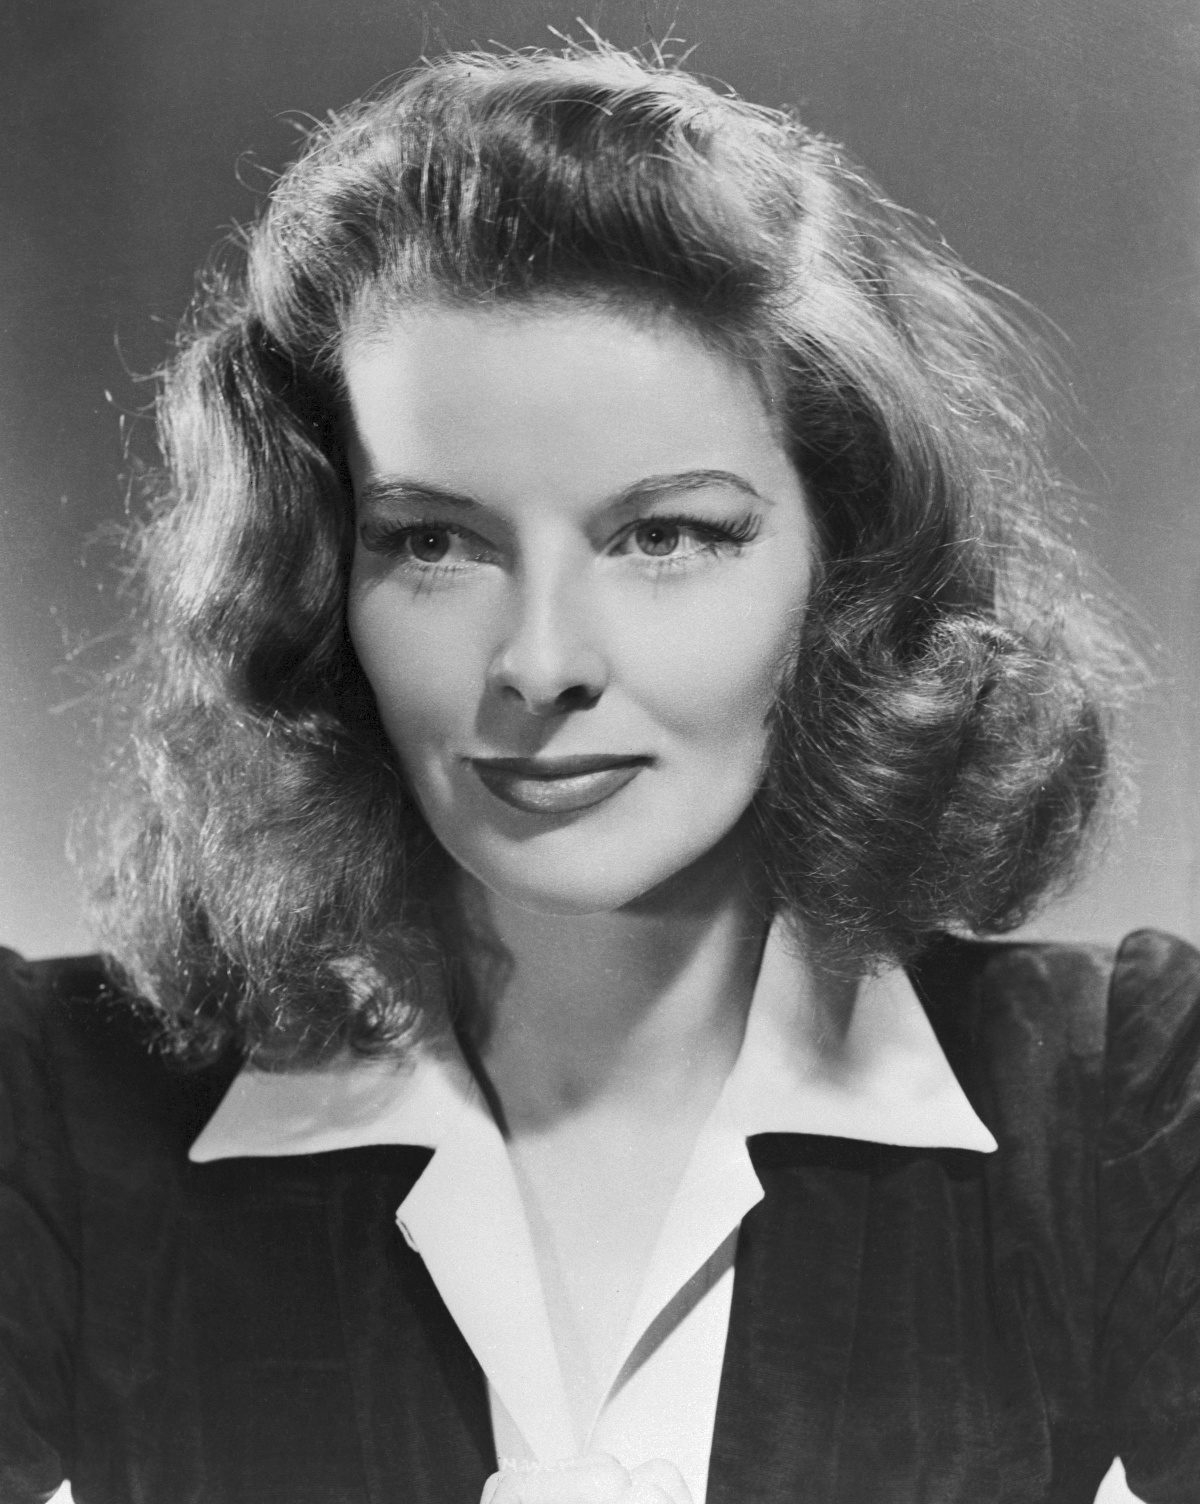 On the picture is Katharine Hepburn